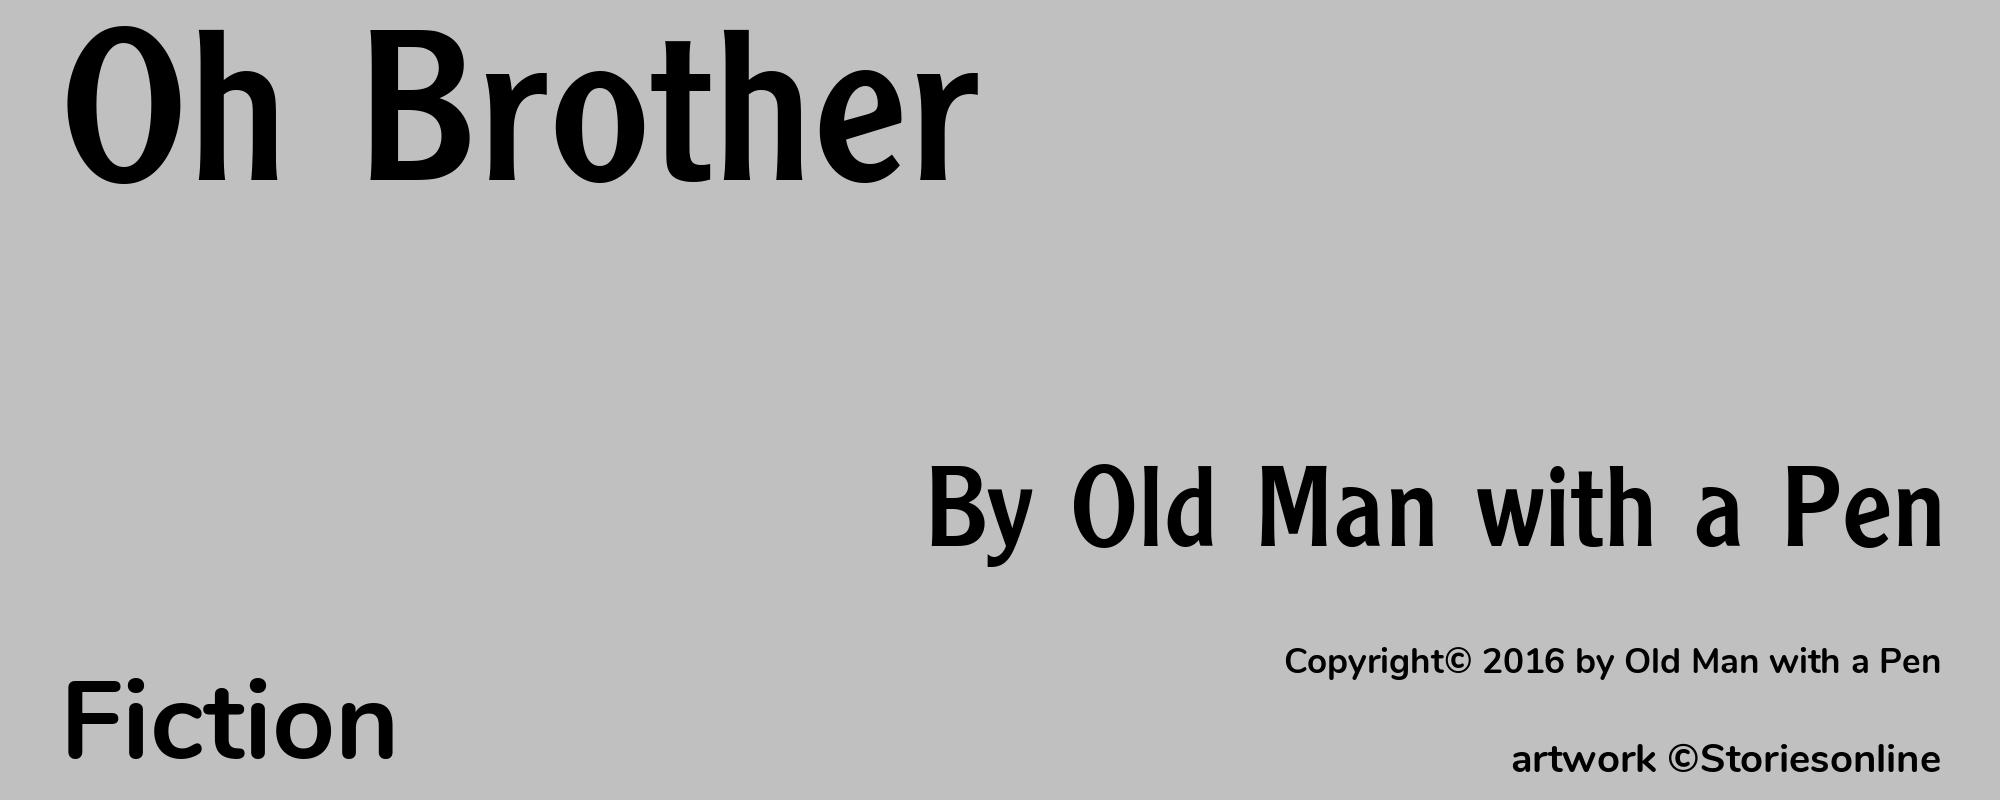 Oh Brother - Cover